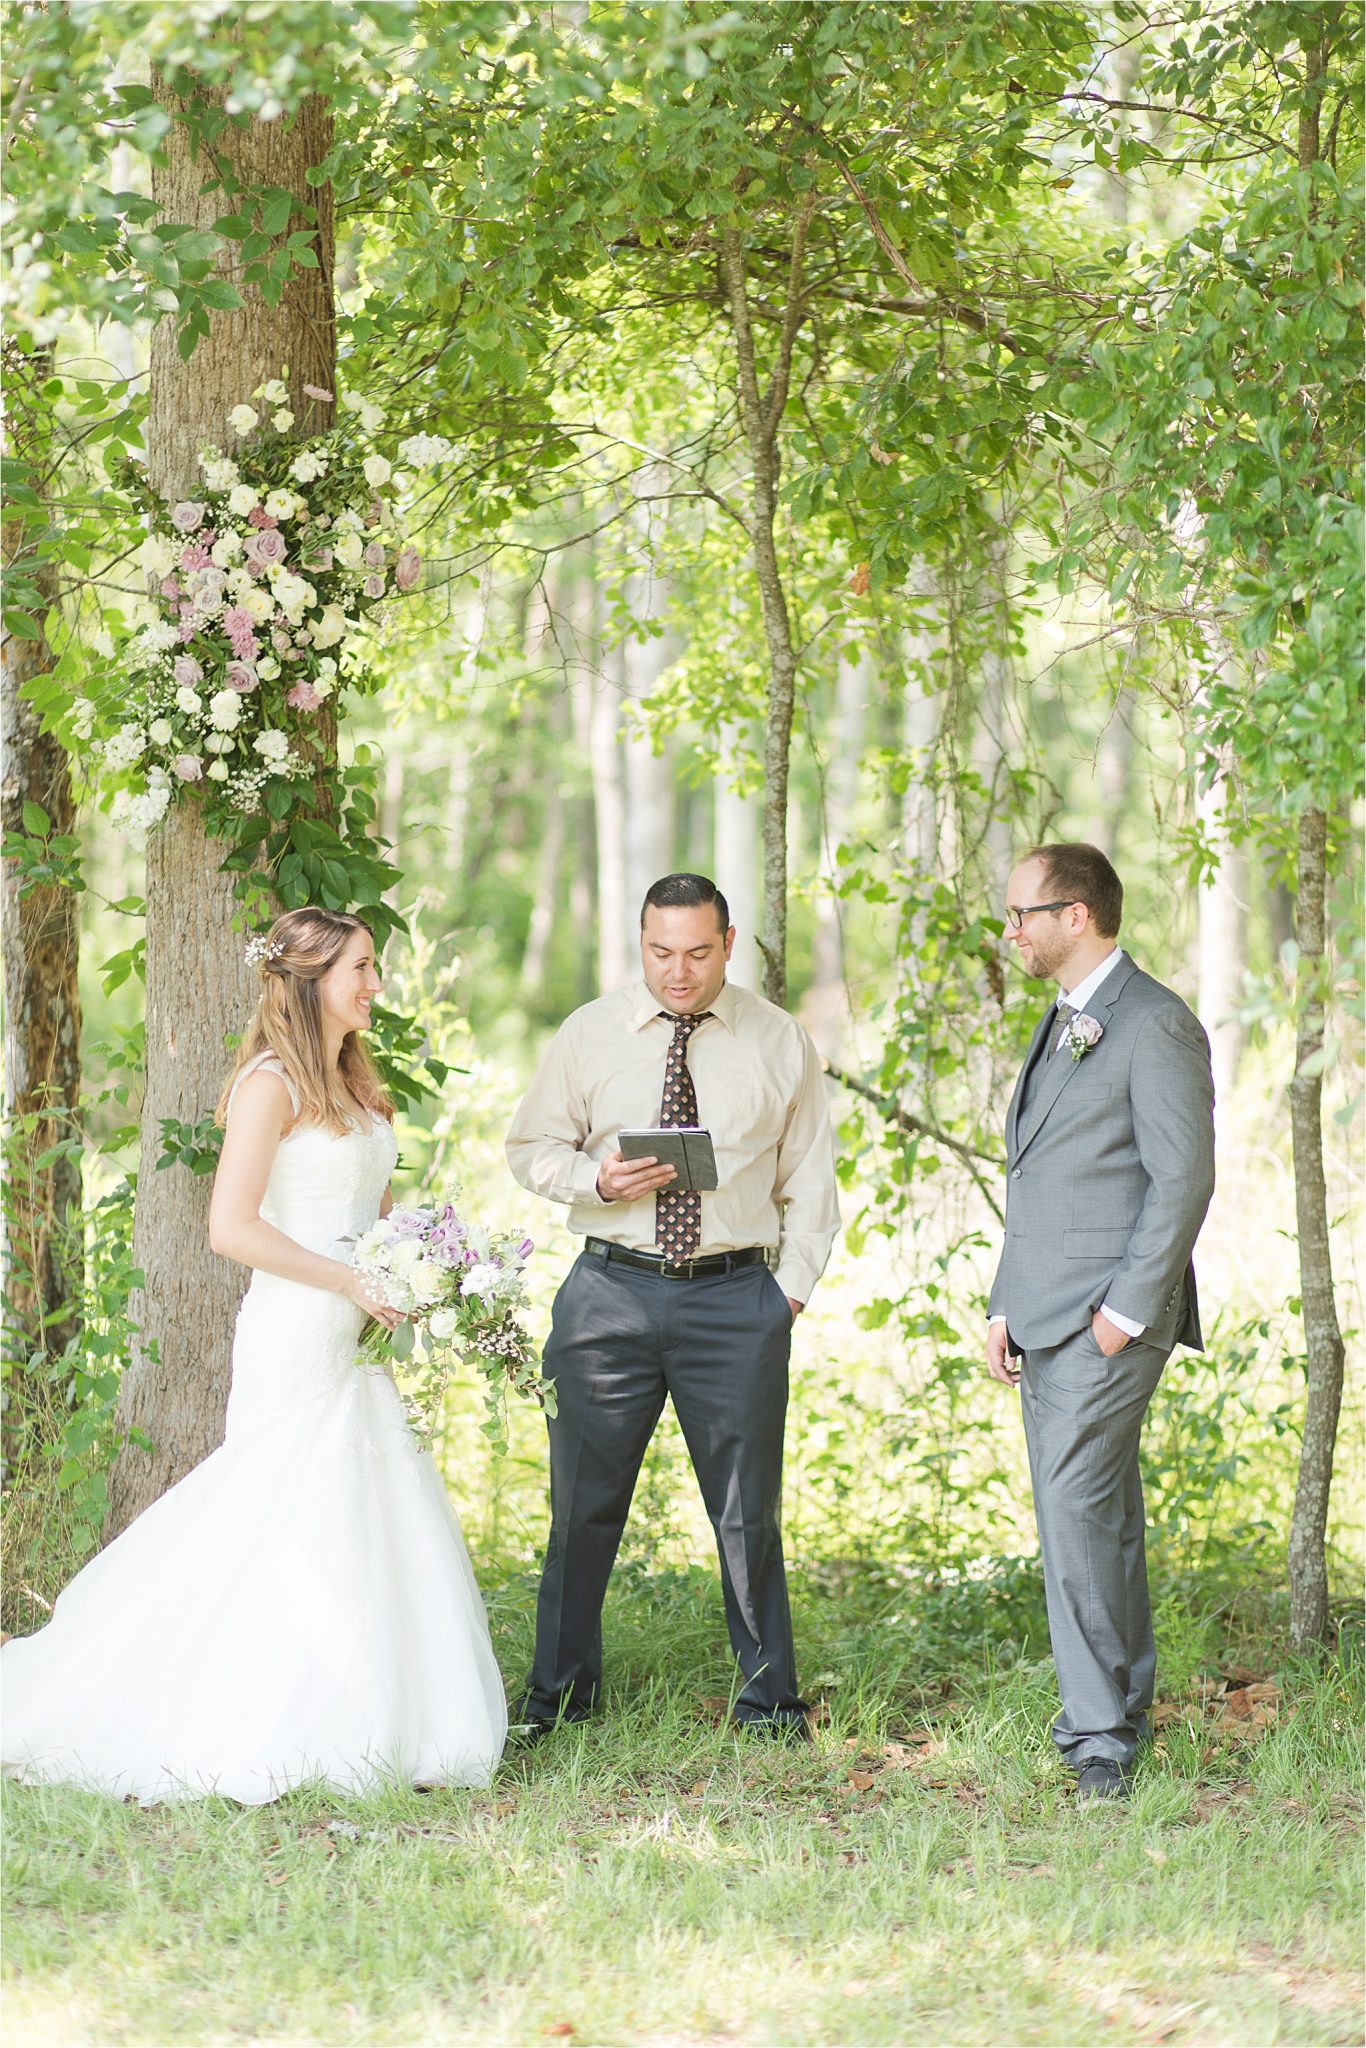 Backyard Wedding in the Country-decorate trees with flowers-woods as wedding backdrop-ceremony in front of forest-woods frame bride and groom ceremony